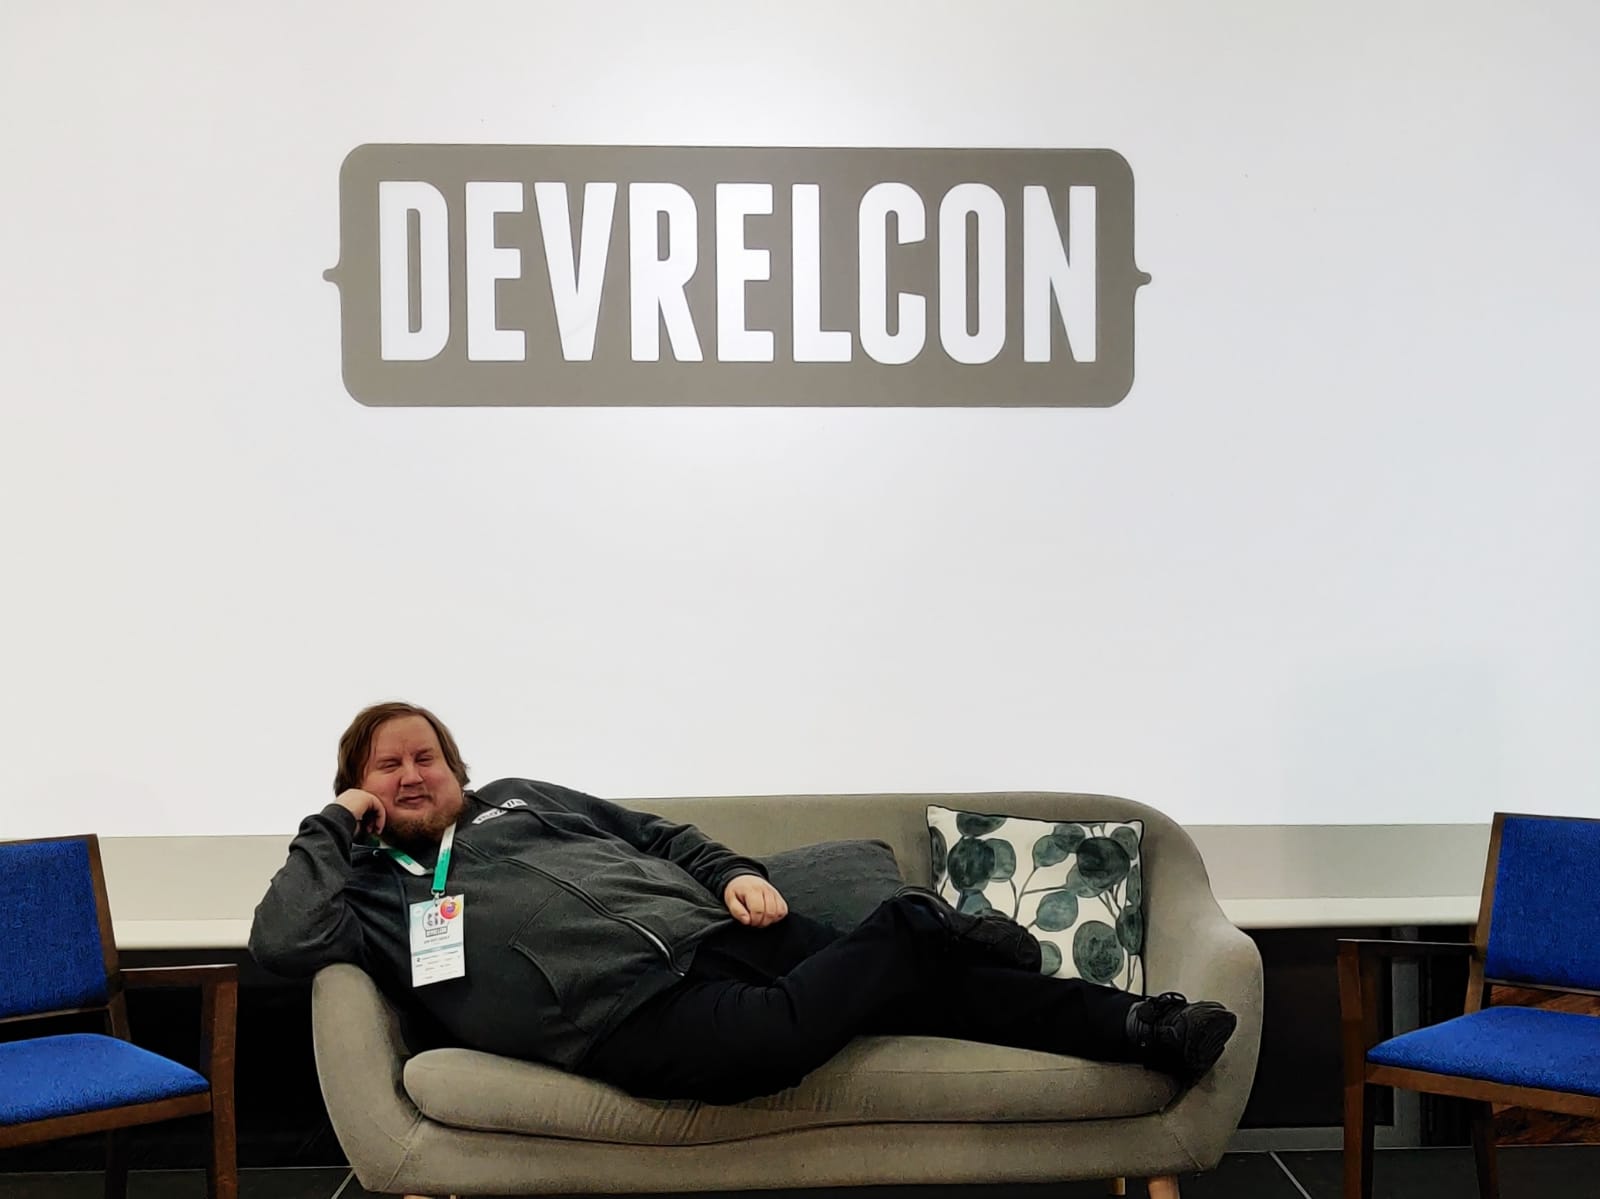 Juhis on lying a couch on stage with DevRelCon logo on the large screen behind him